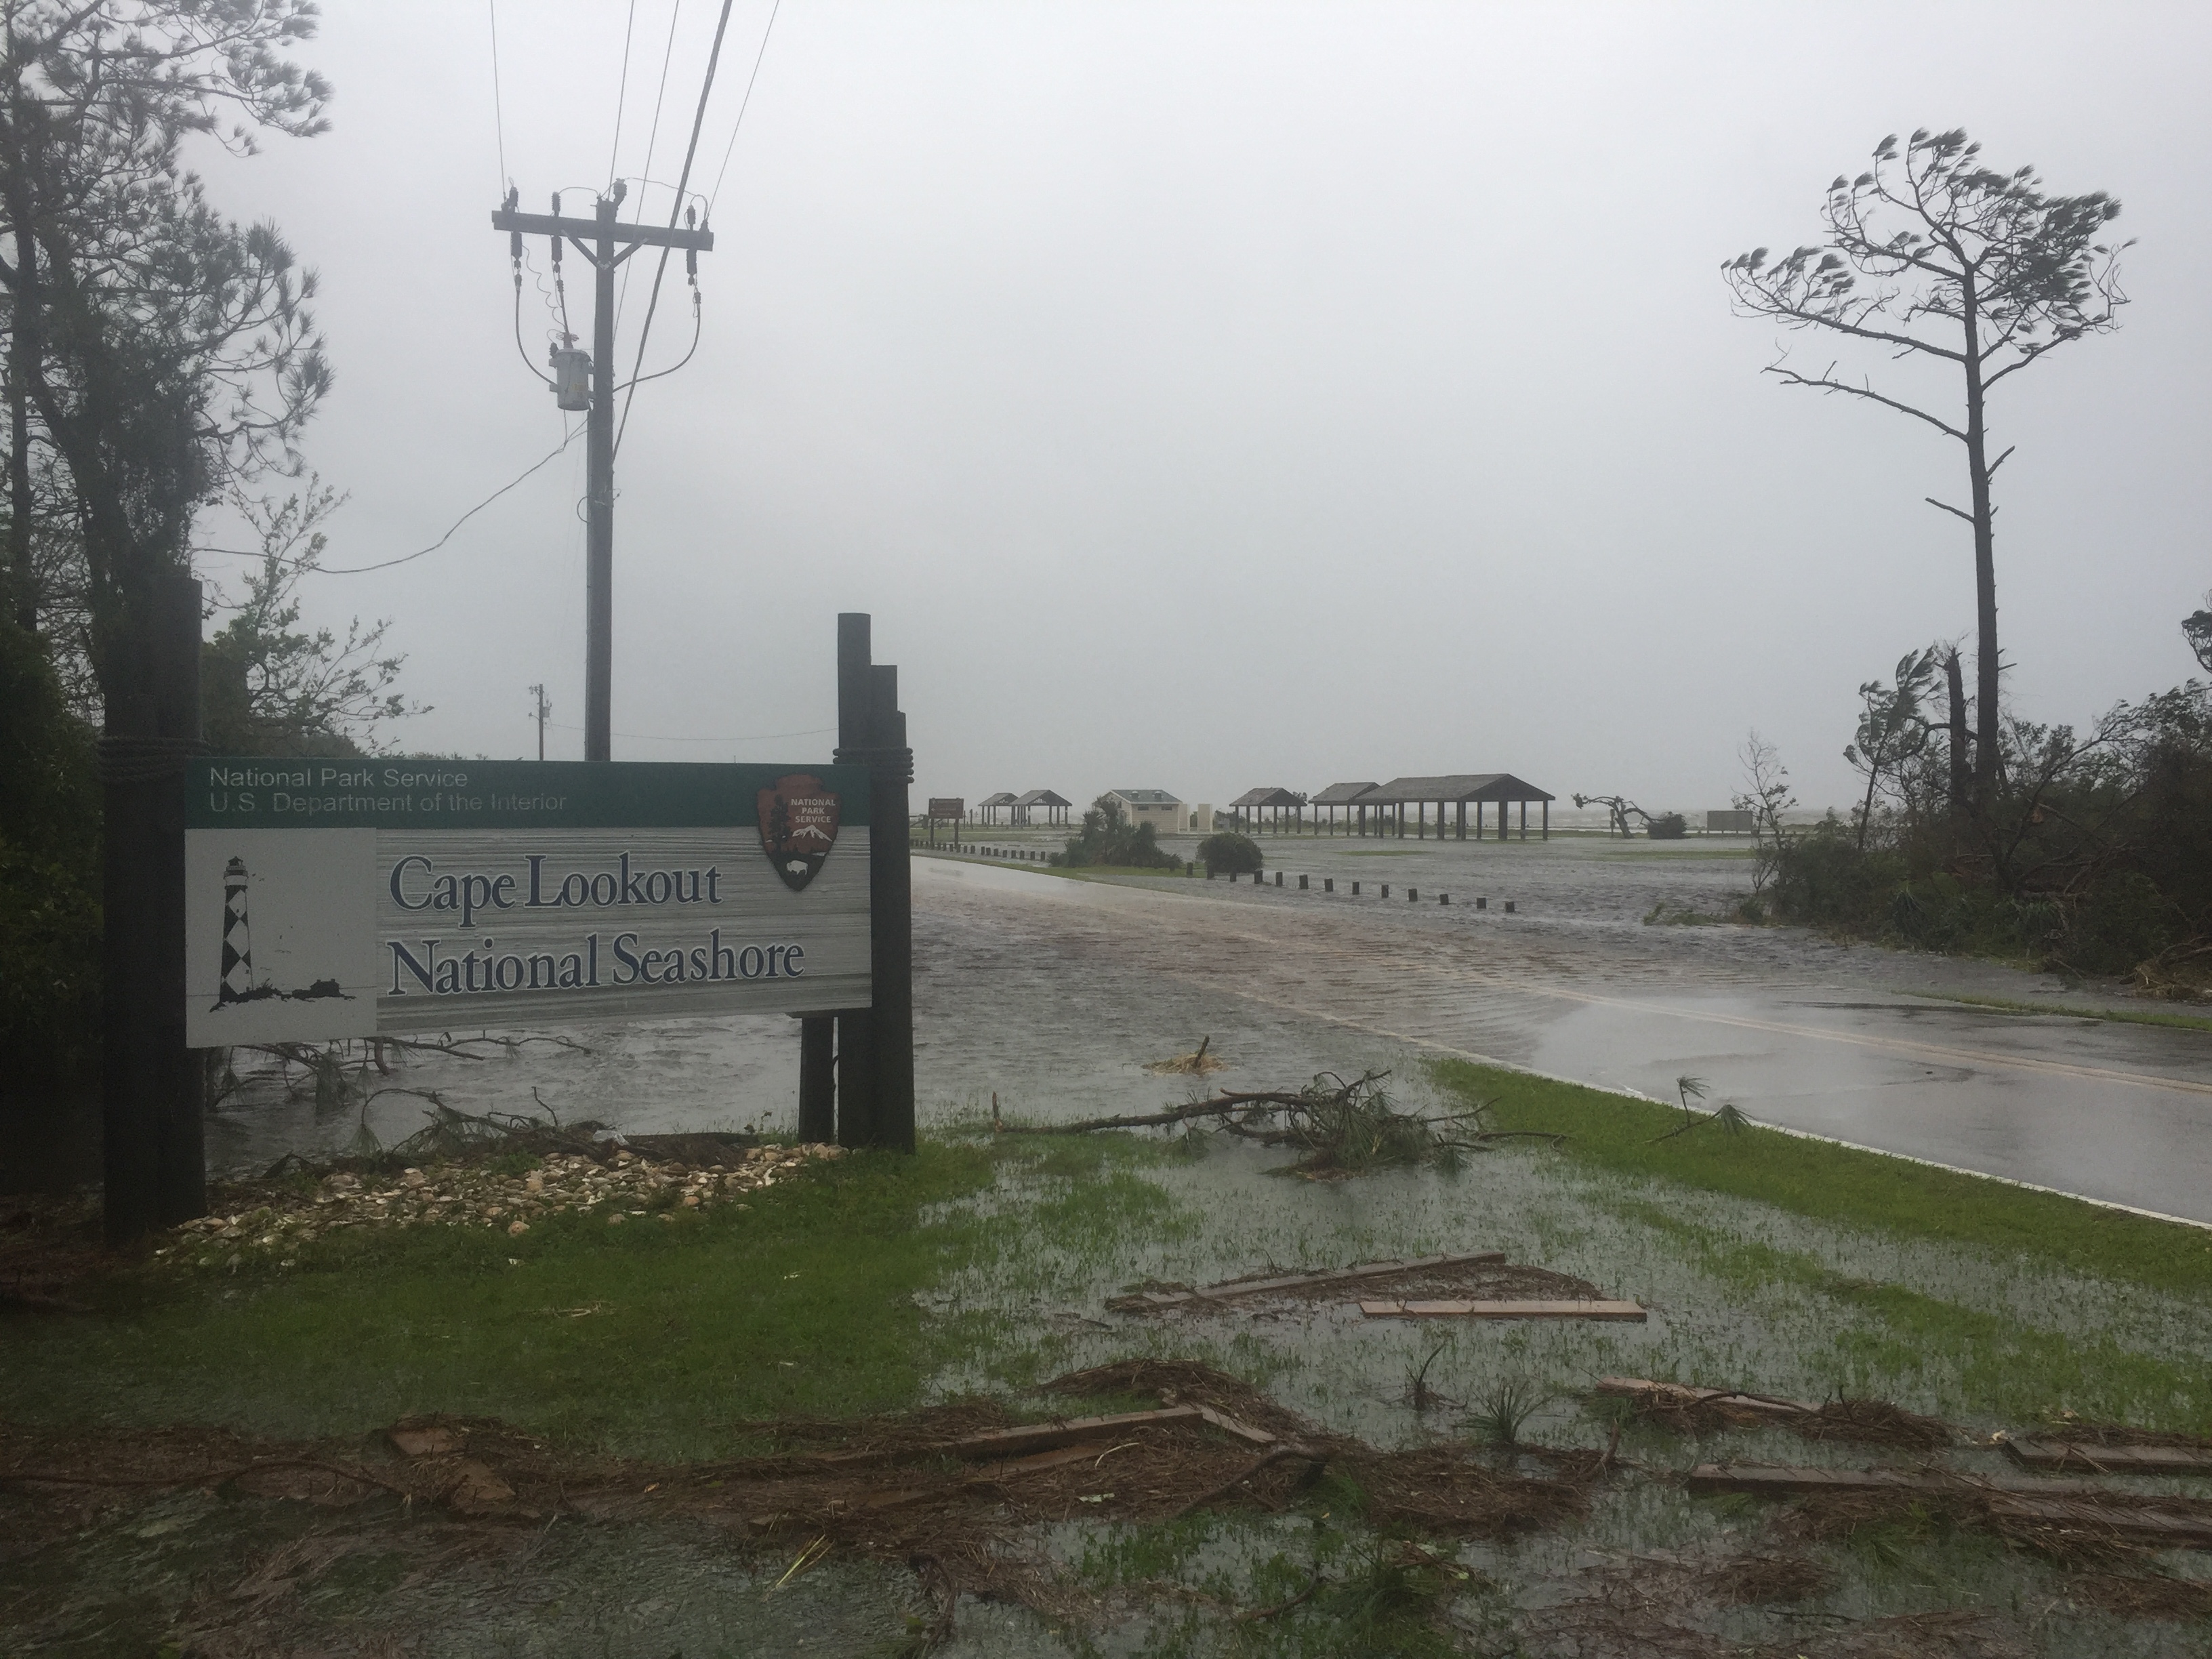 Flood waters and downed limbs surround the entrance sign for Cape Lookout National Seashore.